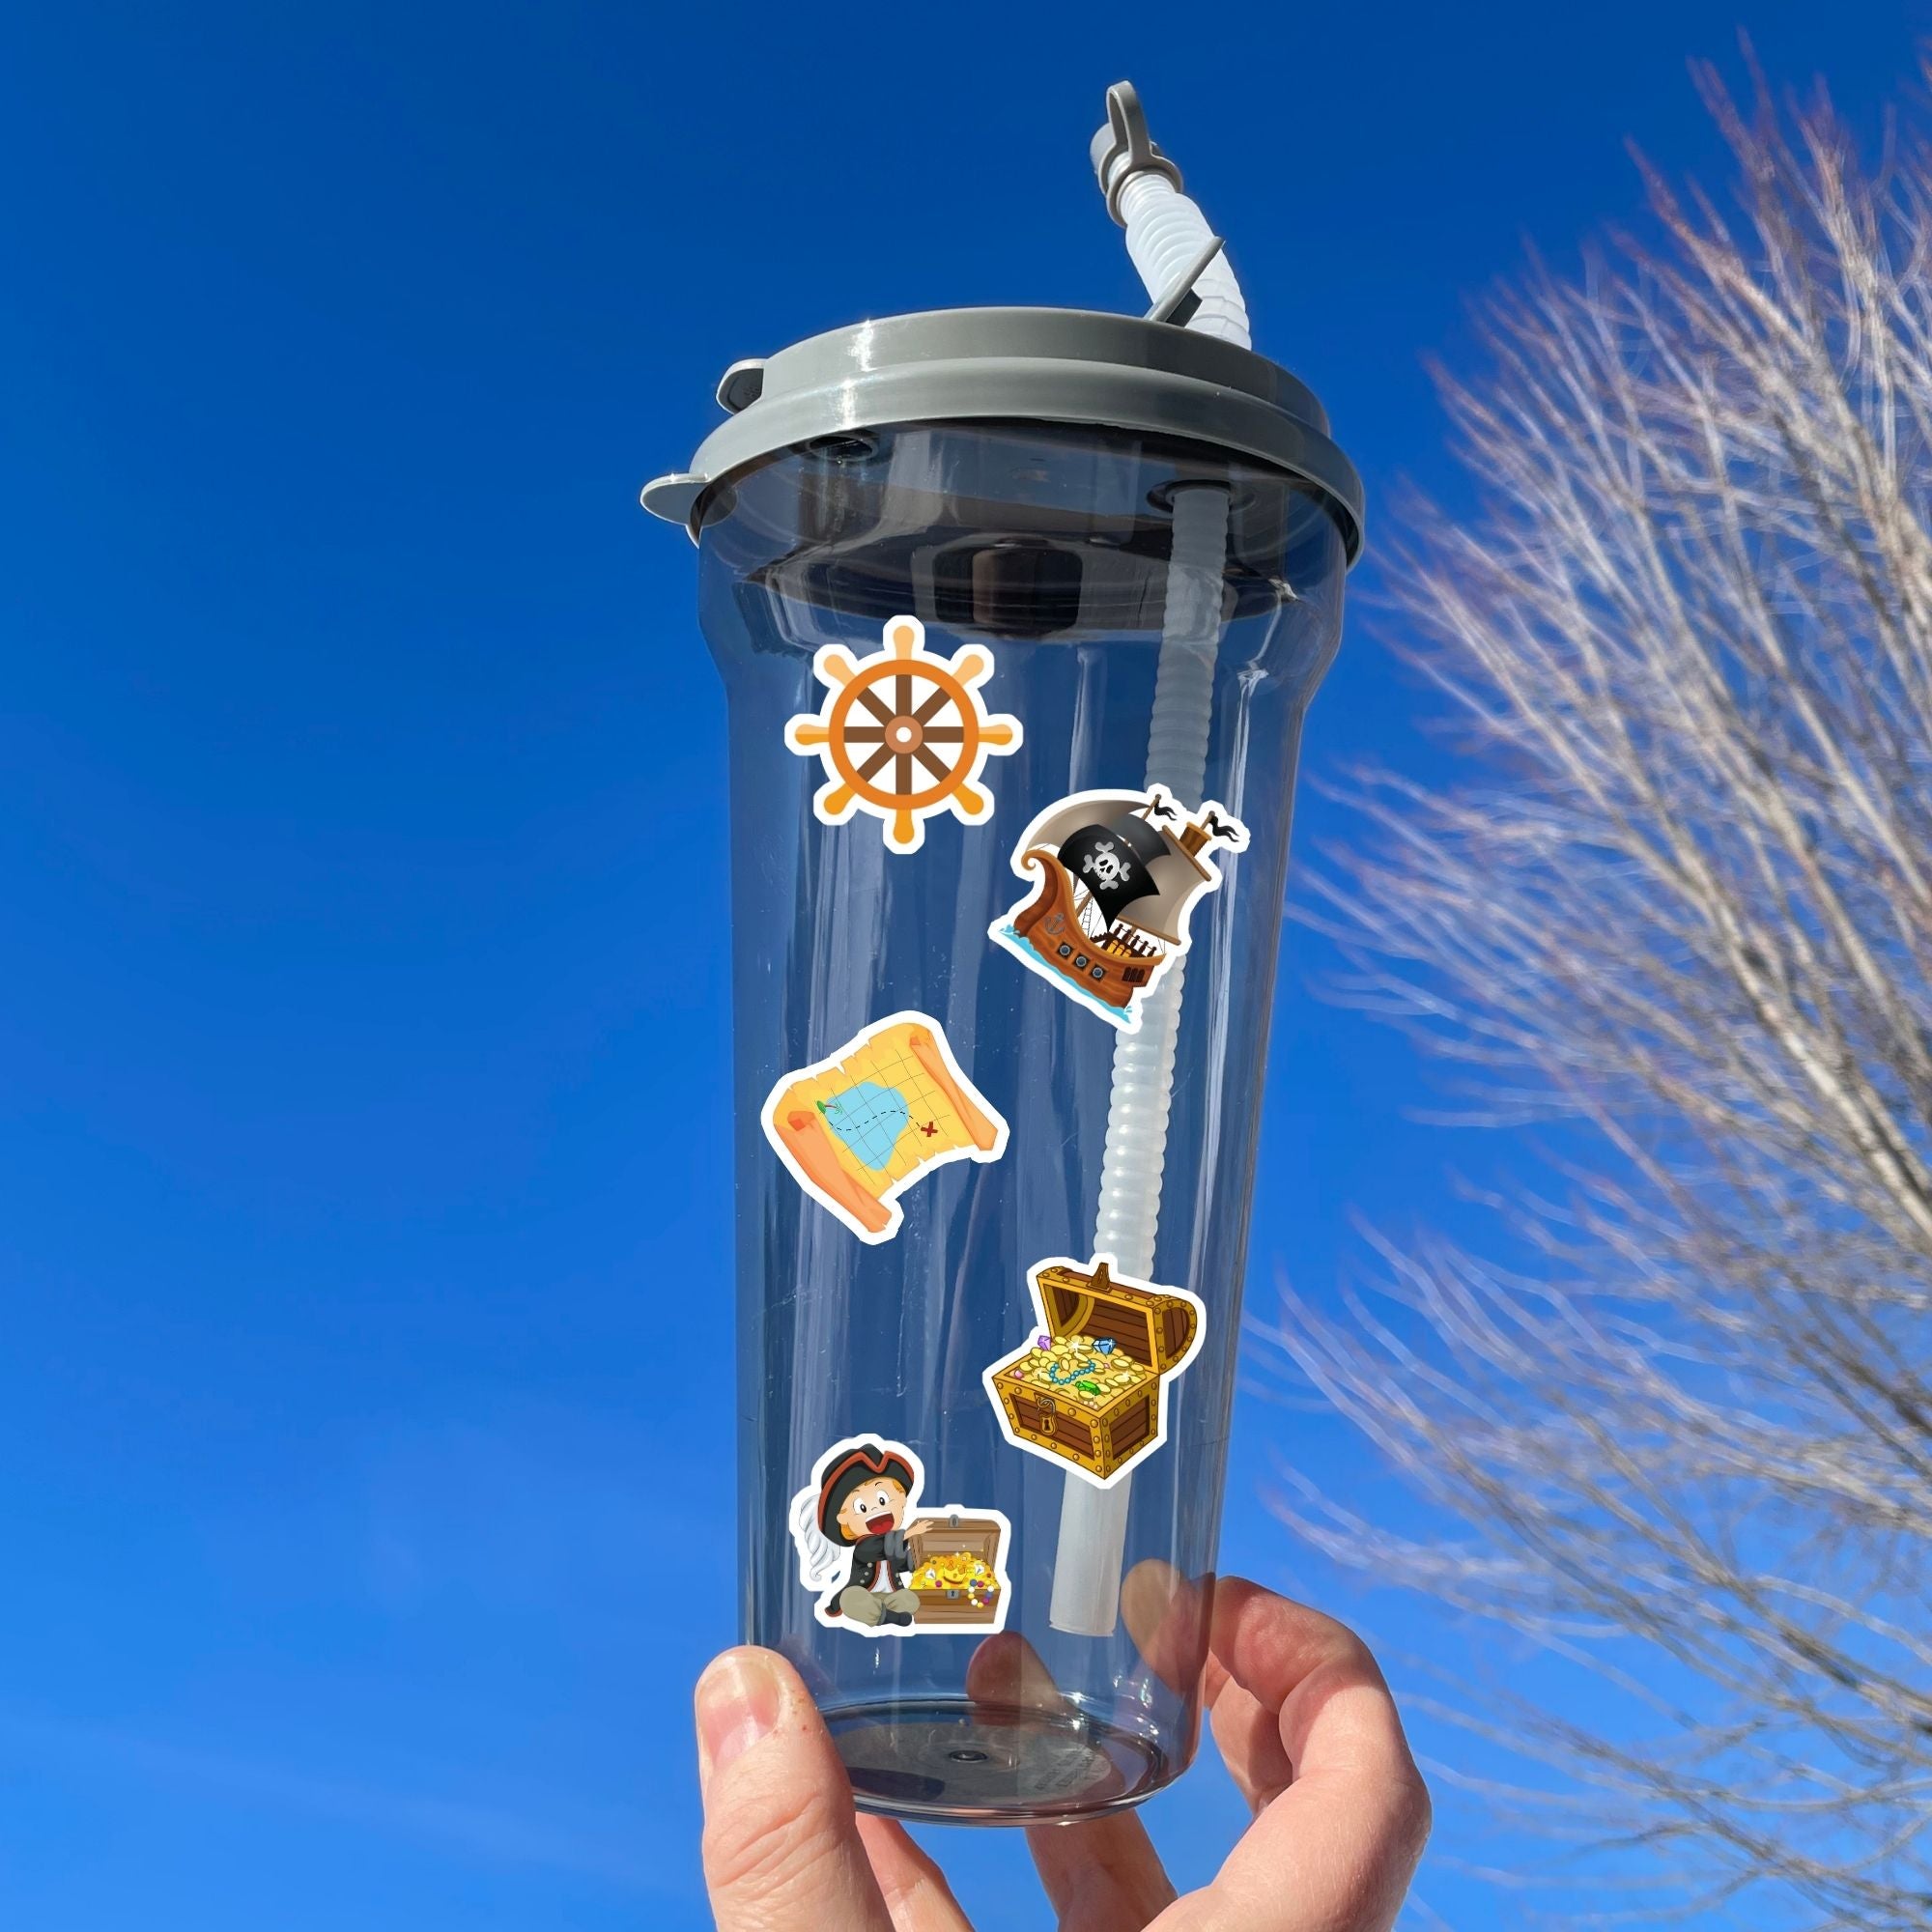 This image shows a water bottle with some of the pirate stickers applied.